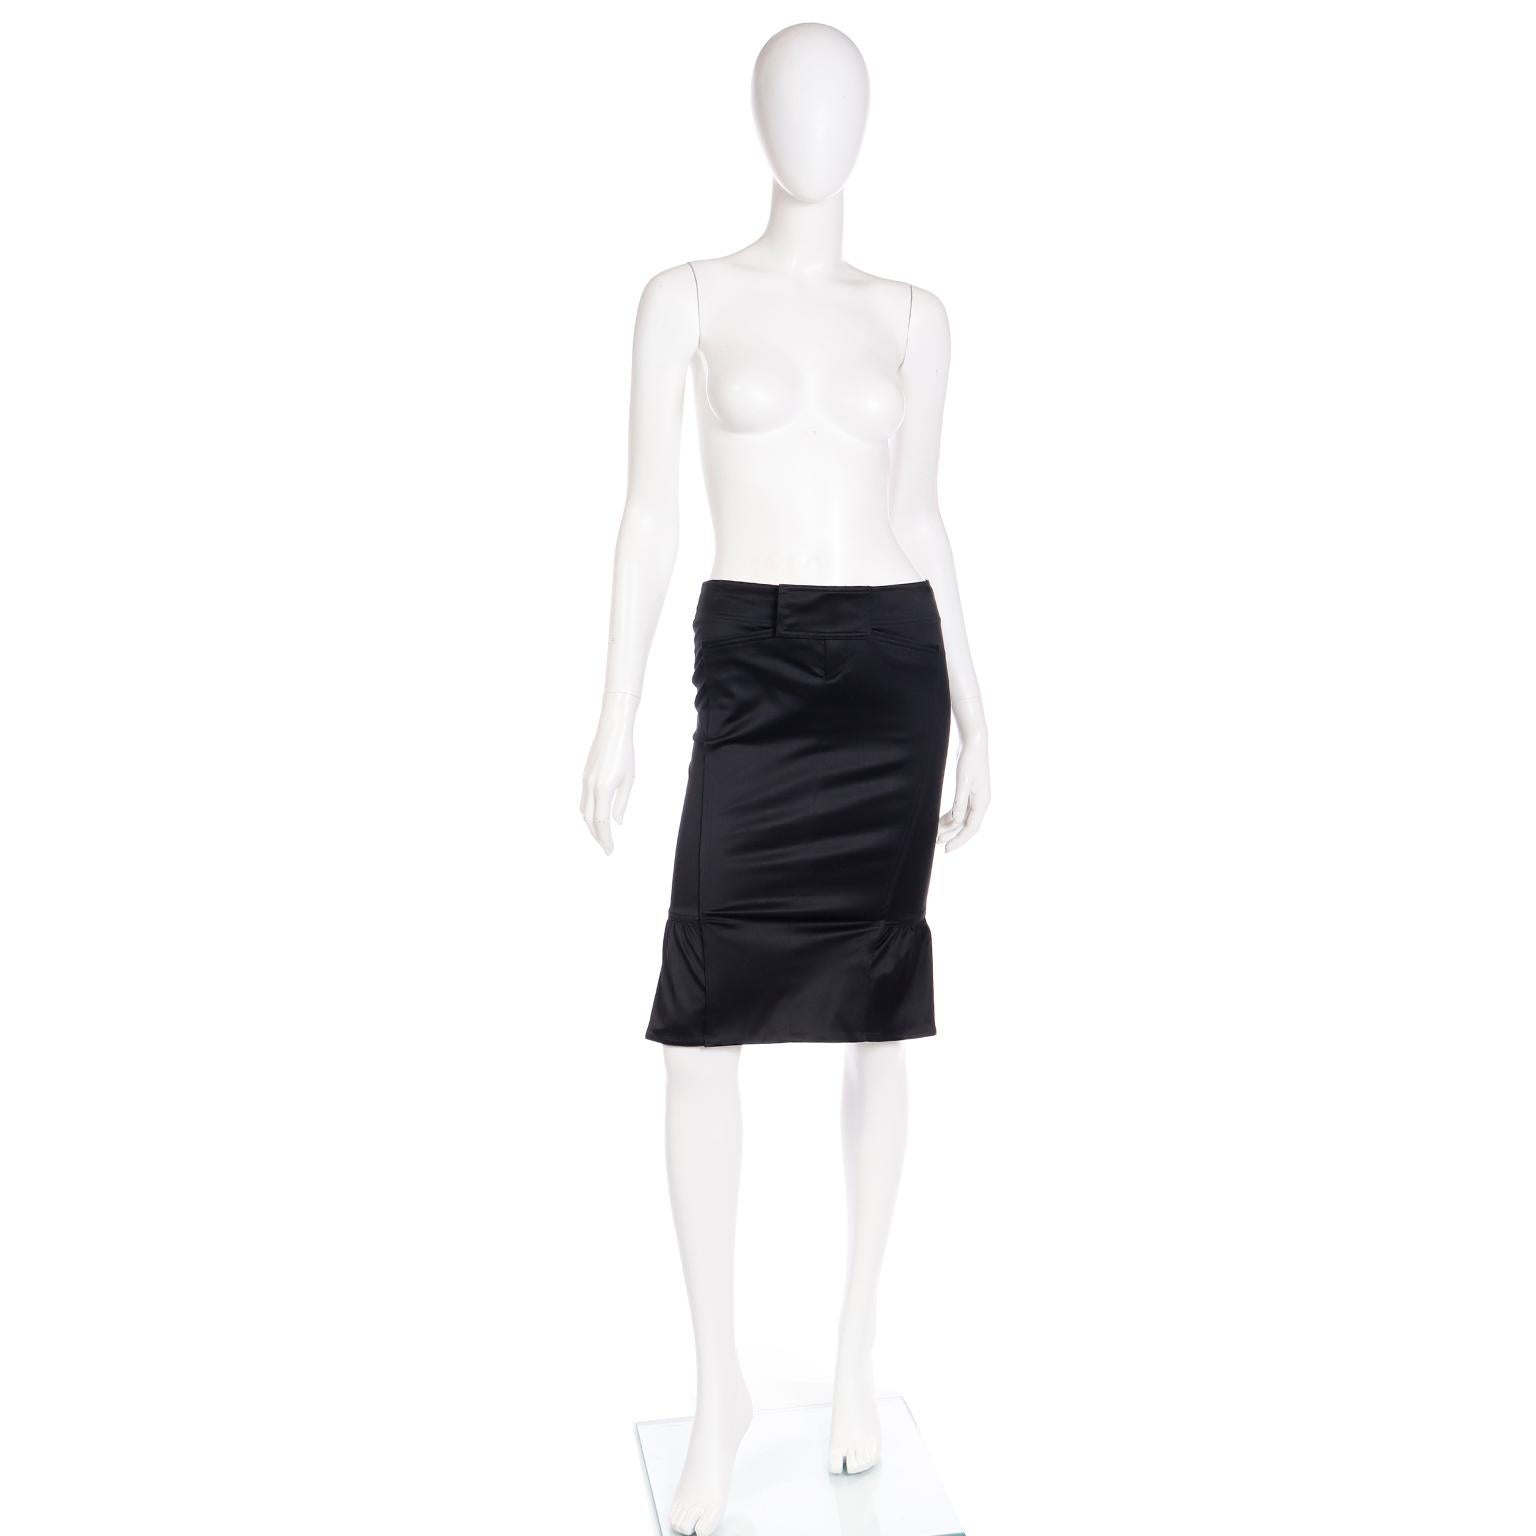 
The incredible vintage Tom Ford for Gucci black cotton skirt has so many fun details! The skirt is meant to be worn very close to the body and is similar to a pencil skirt with a very slight flare created by the unique gathering on the sides around